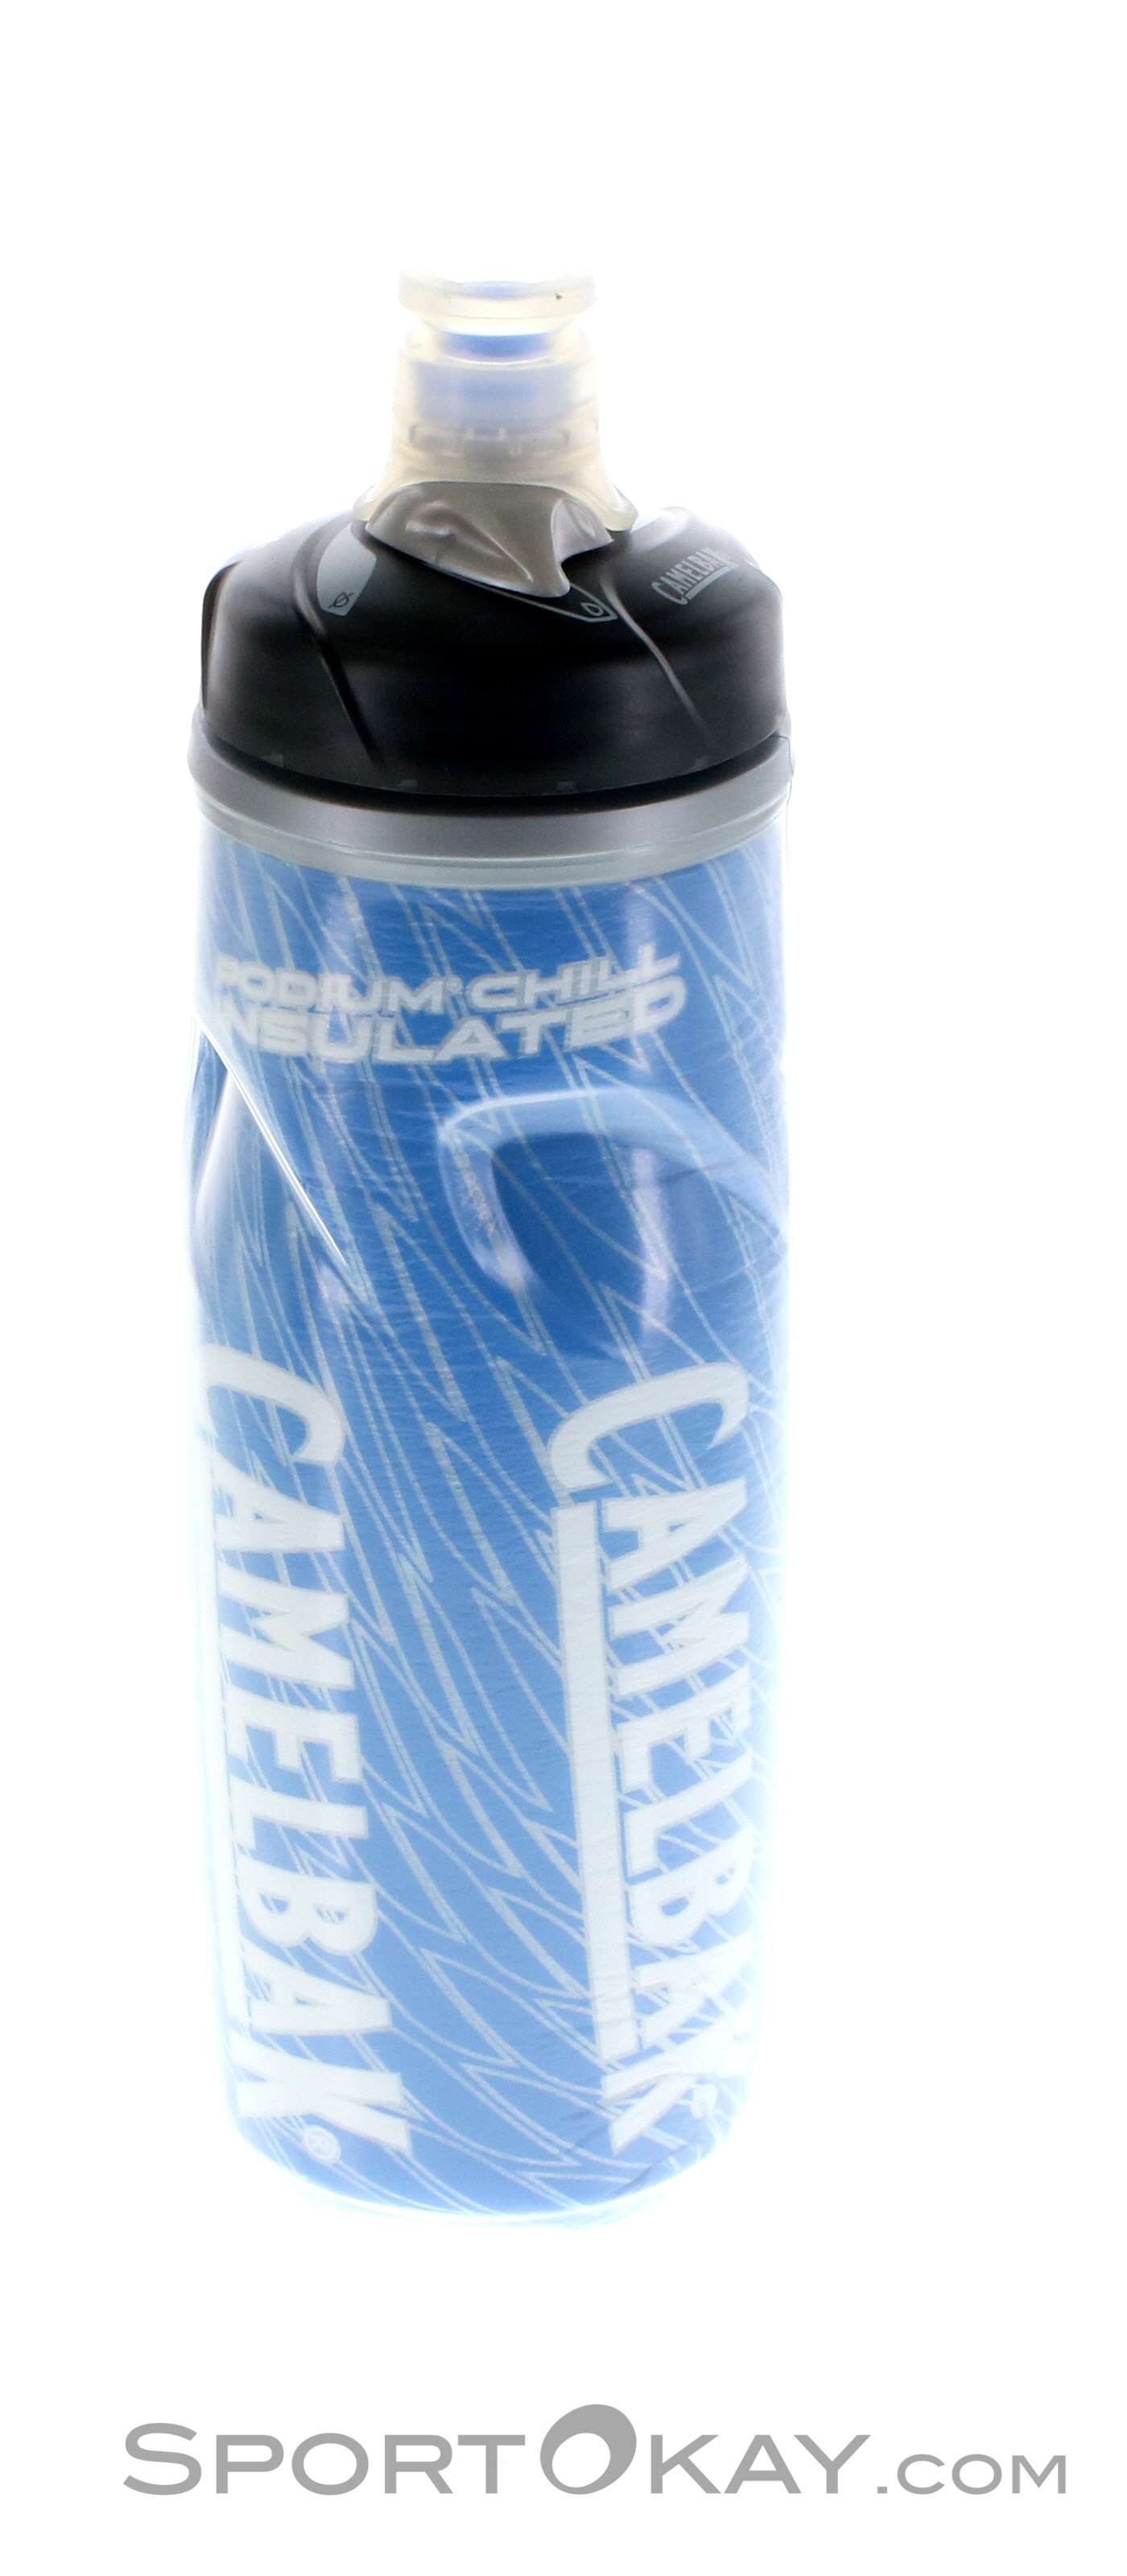 Camelbak Podium Ice 0,62l Trinkflasche - Other - Camping - Outdoor - All